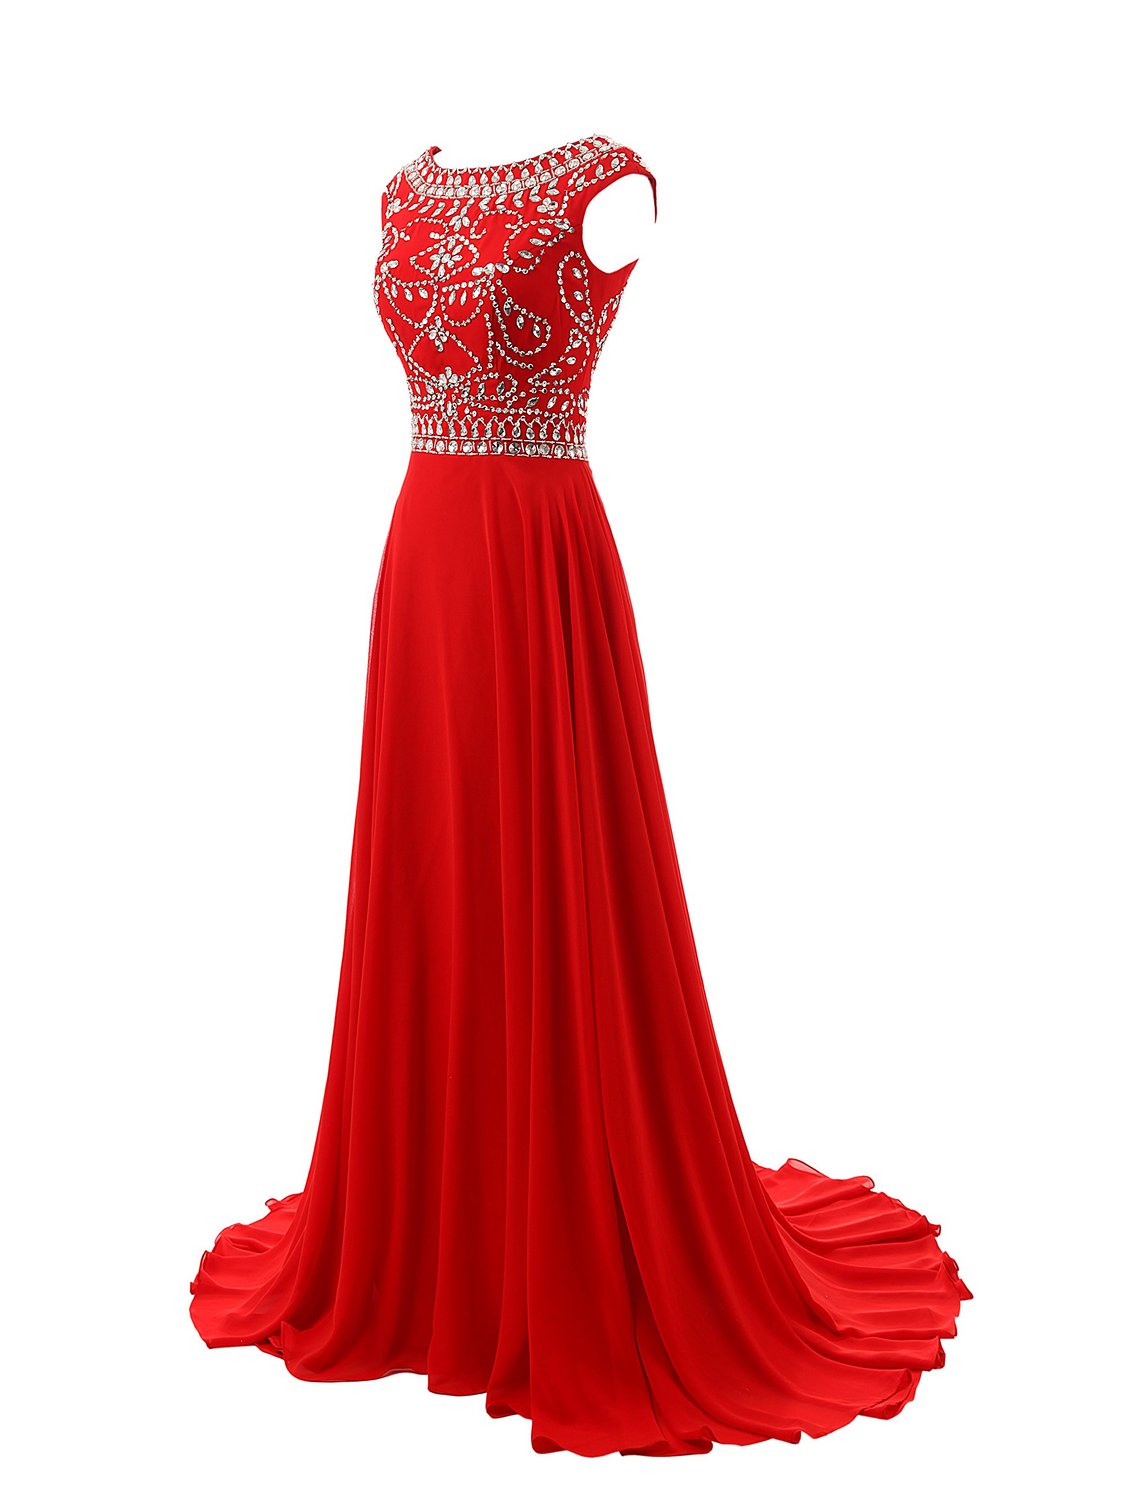 Sparkle Burgundy Beadings Prom Gown Red Style Prom Dresses Evening Dress Pageant Dresses For Formal Occasions